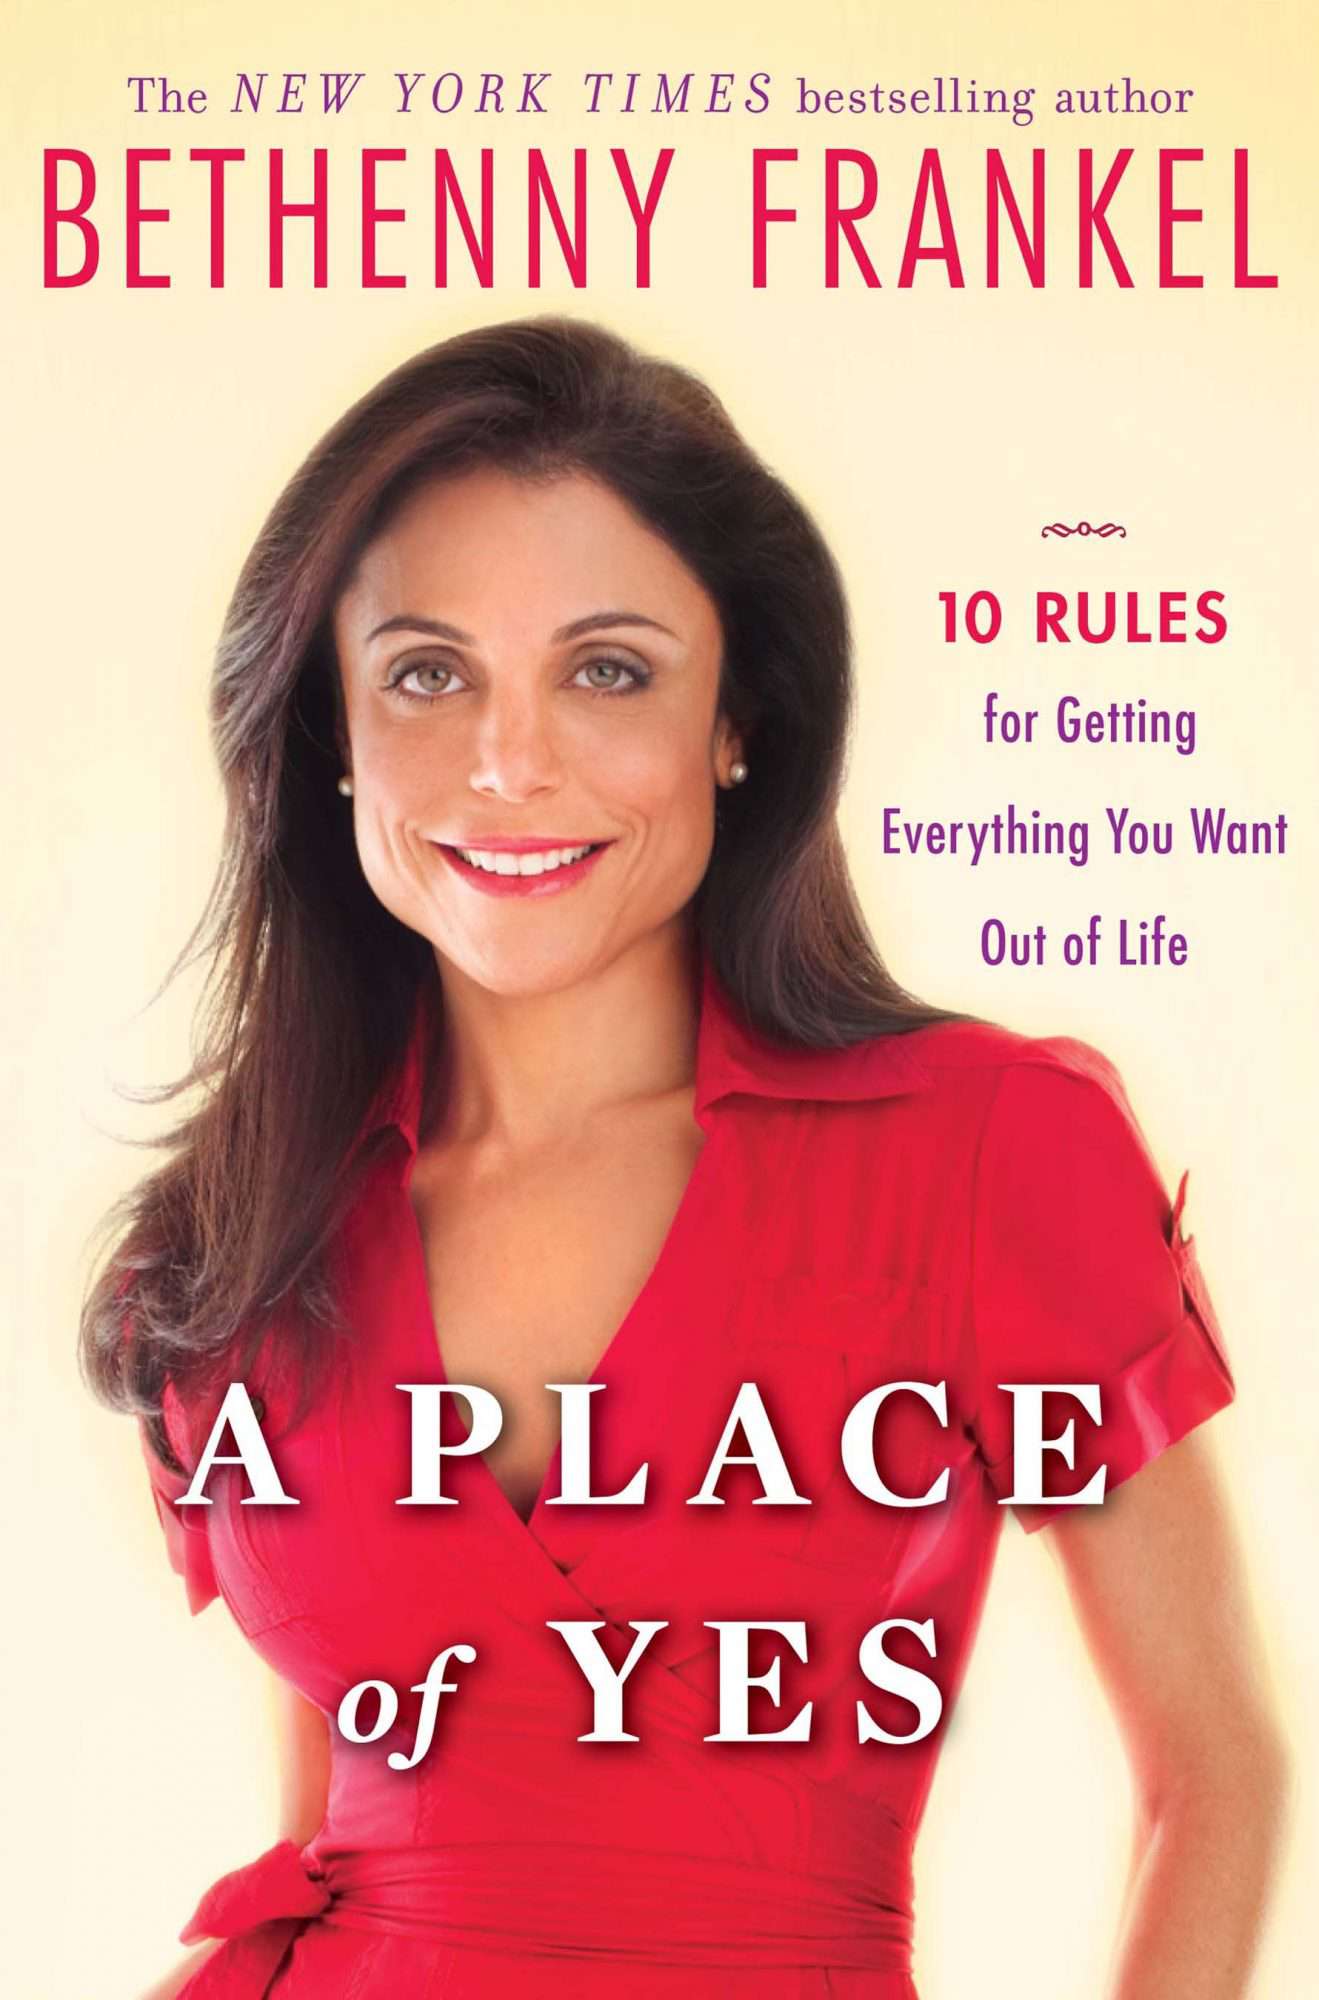 A Place of Yes: 10 Rules for Getting Everything You Want Out of Life, by Bethenny Frankel